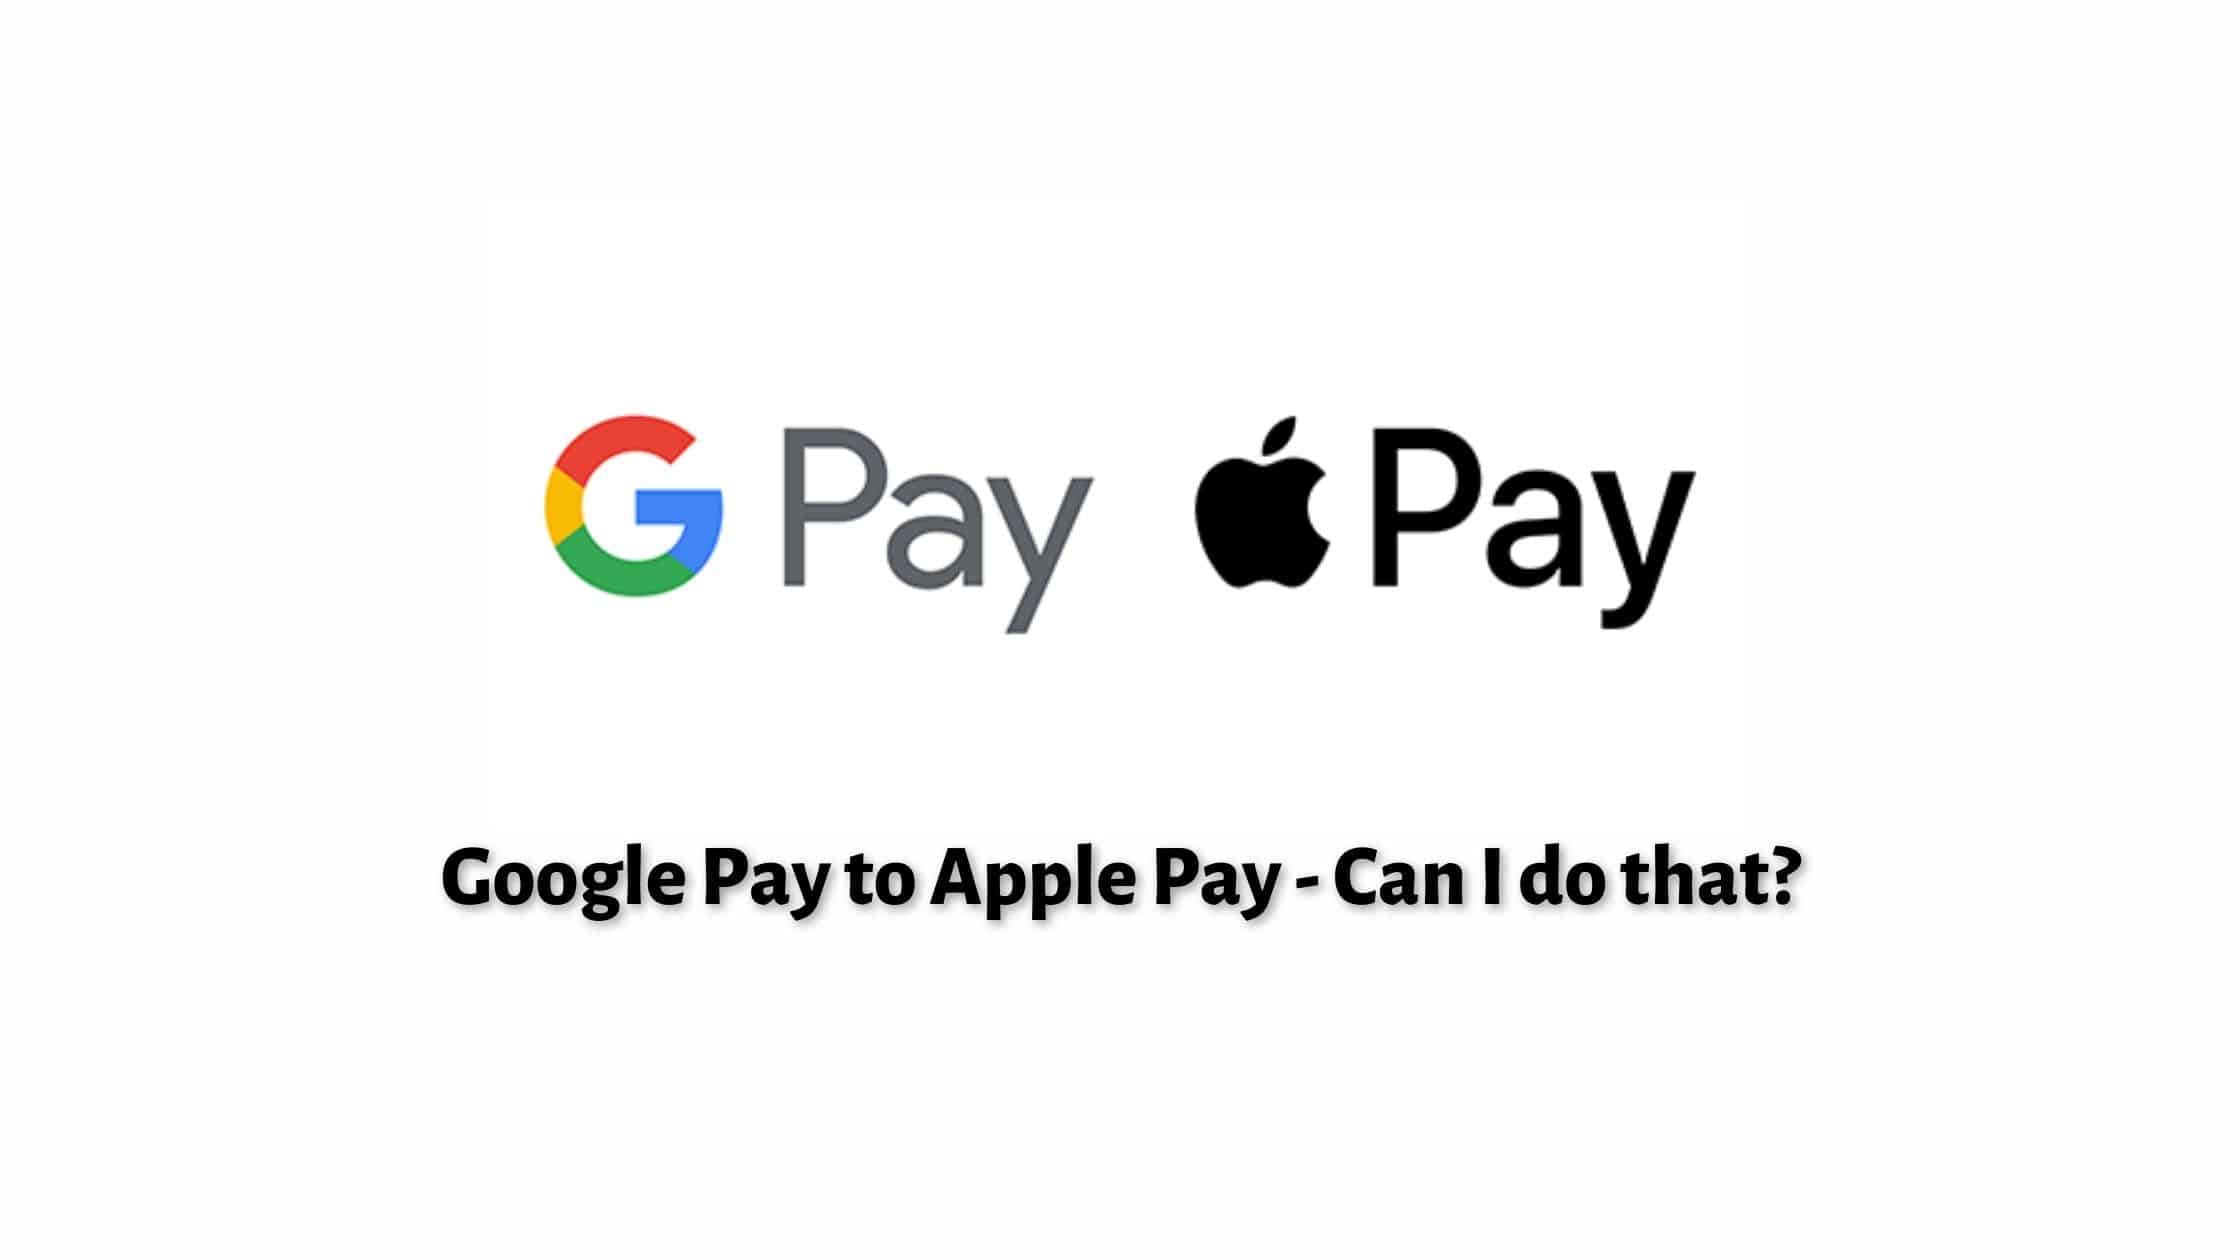 Google Pay to Apple Pay